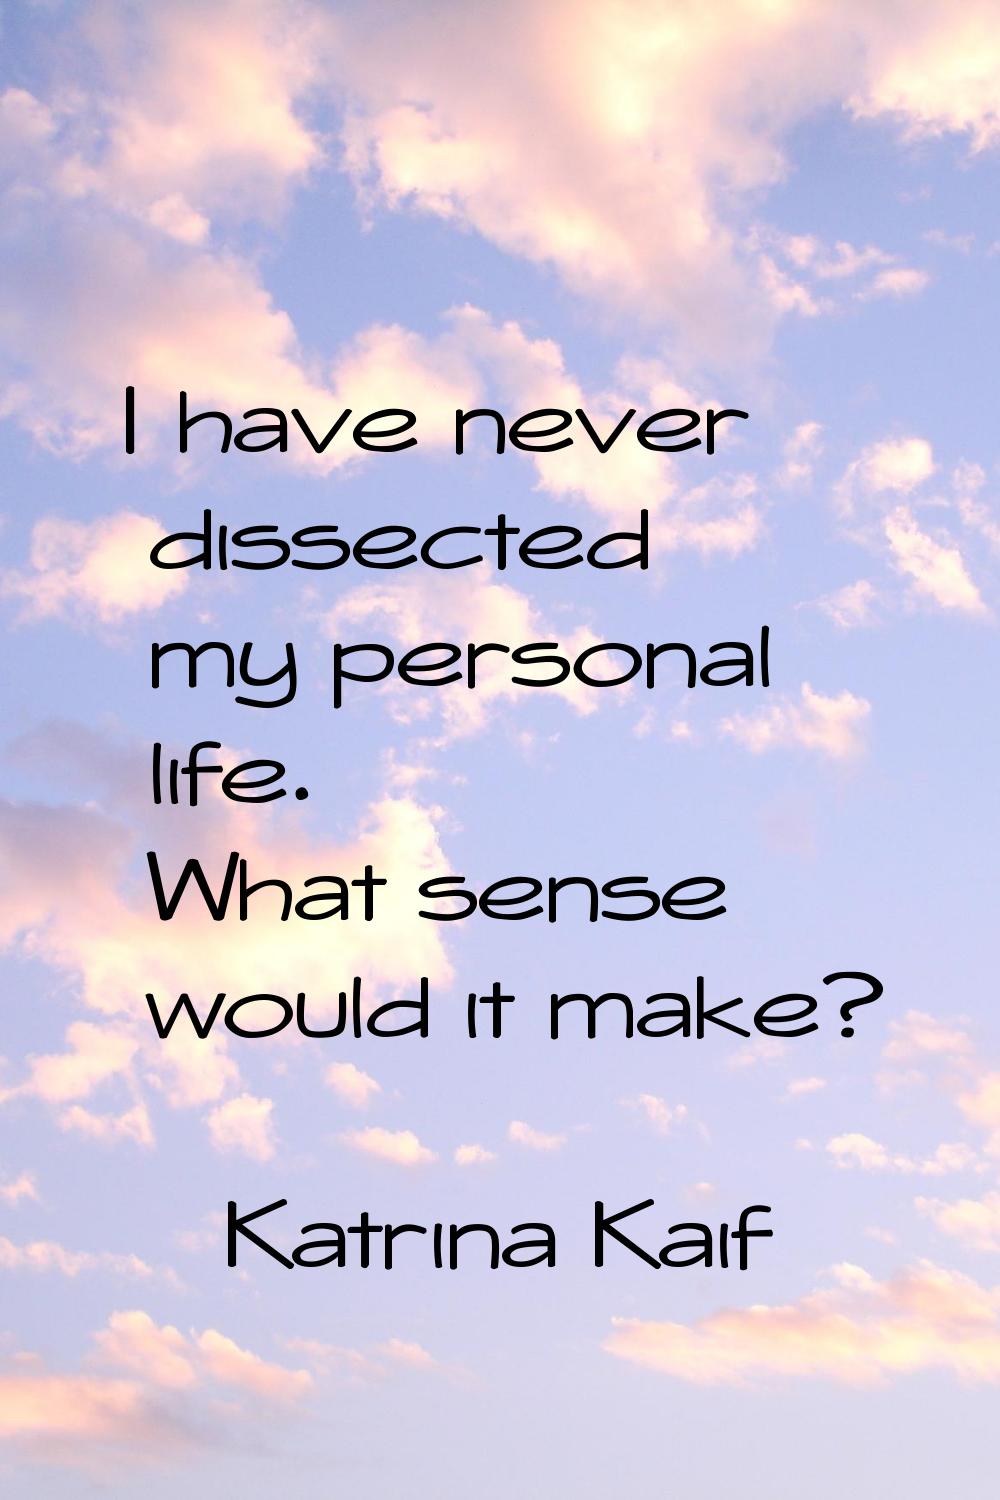 I have never dissected my personal life. What sense would it make?